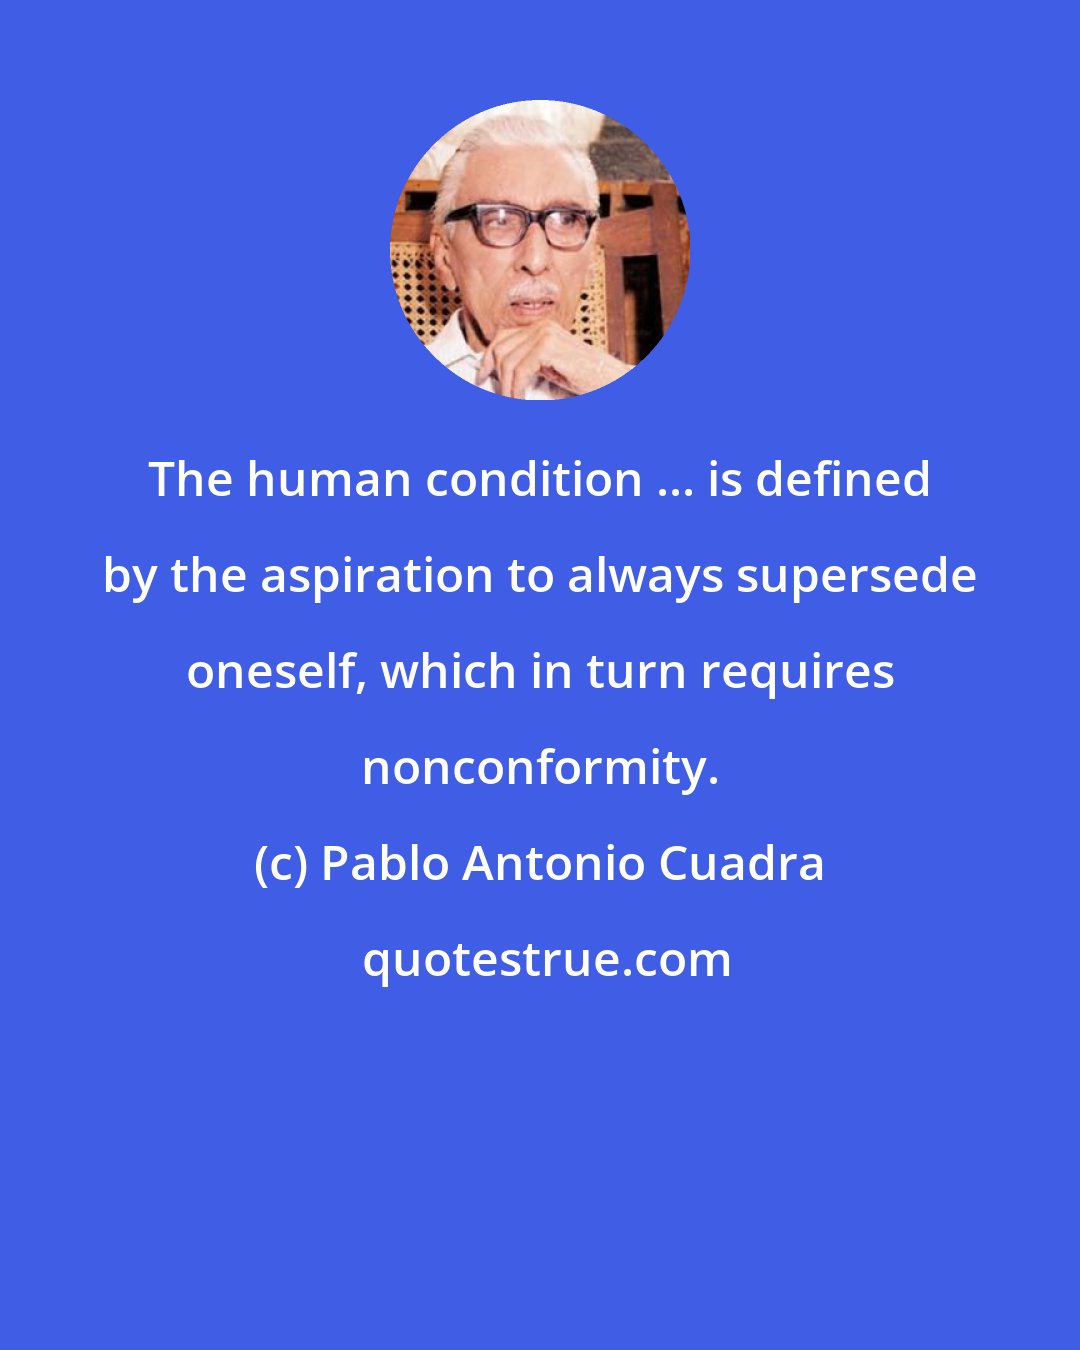 Pablo Antonio Cuadra: The human condition ... is defined by the aspiration to always supersede oneself, which in turn requires nonconformity.